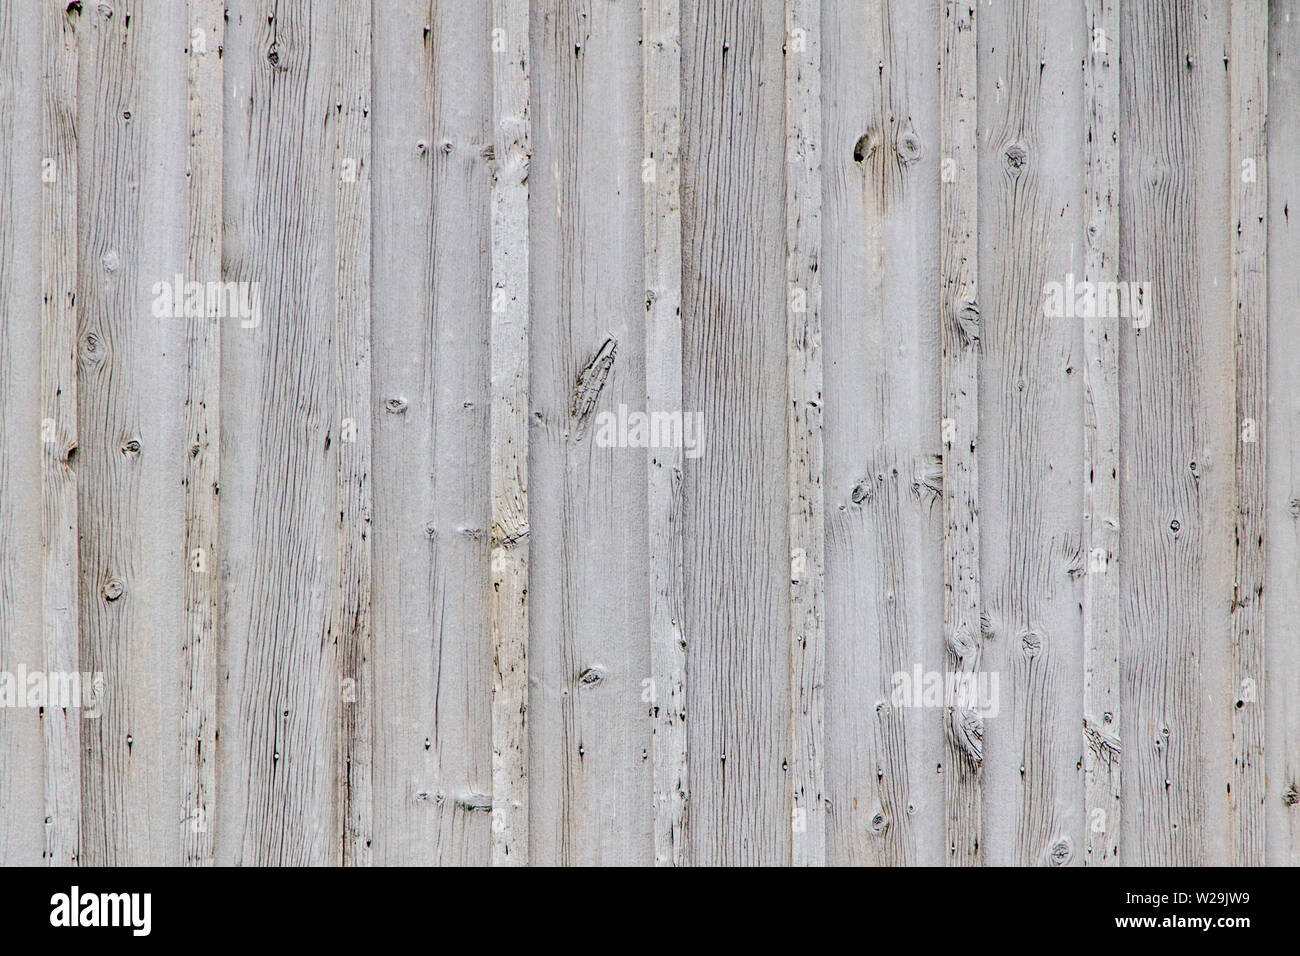 Textured Grain Barn Wood Background. Grey weathered wooden barn wall background in horizontal orientation. Stock Photo